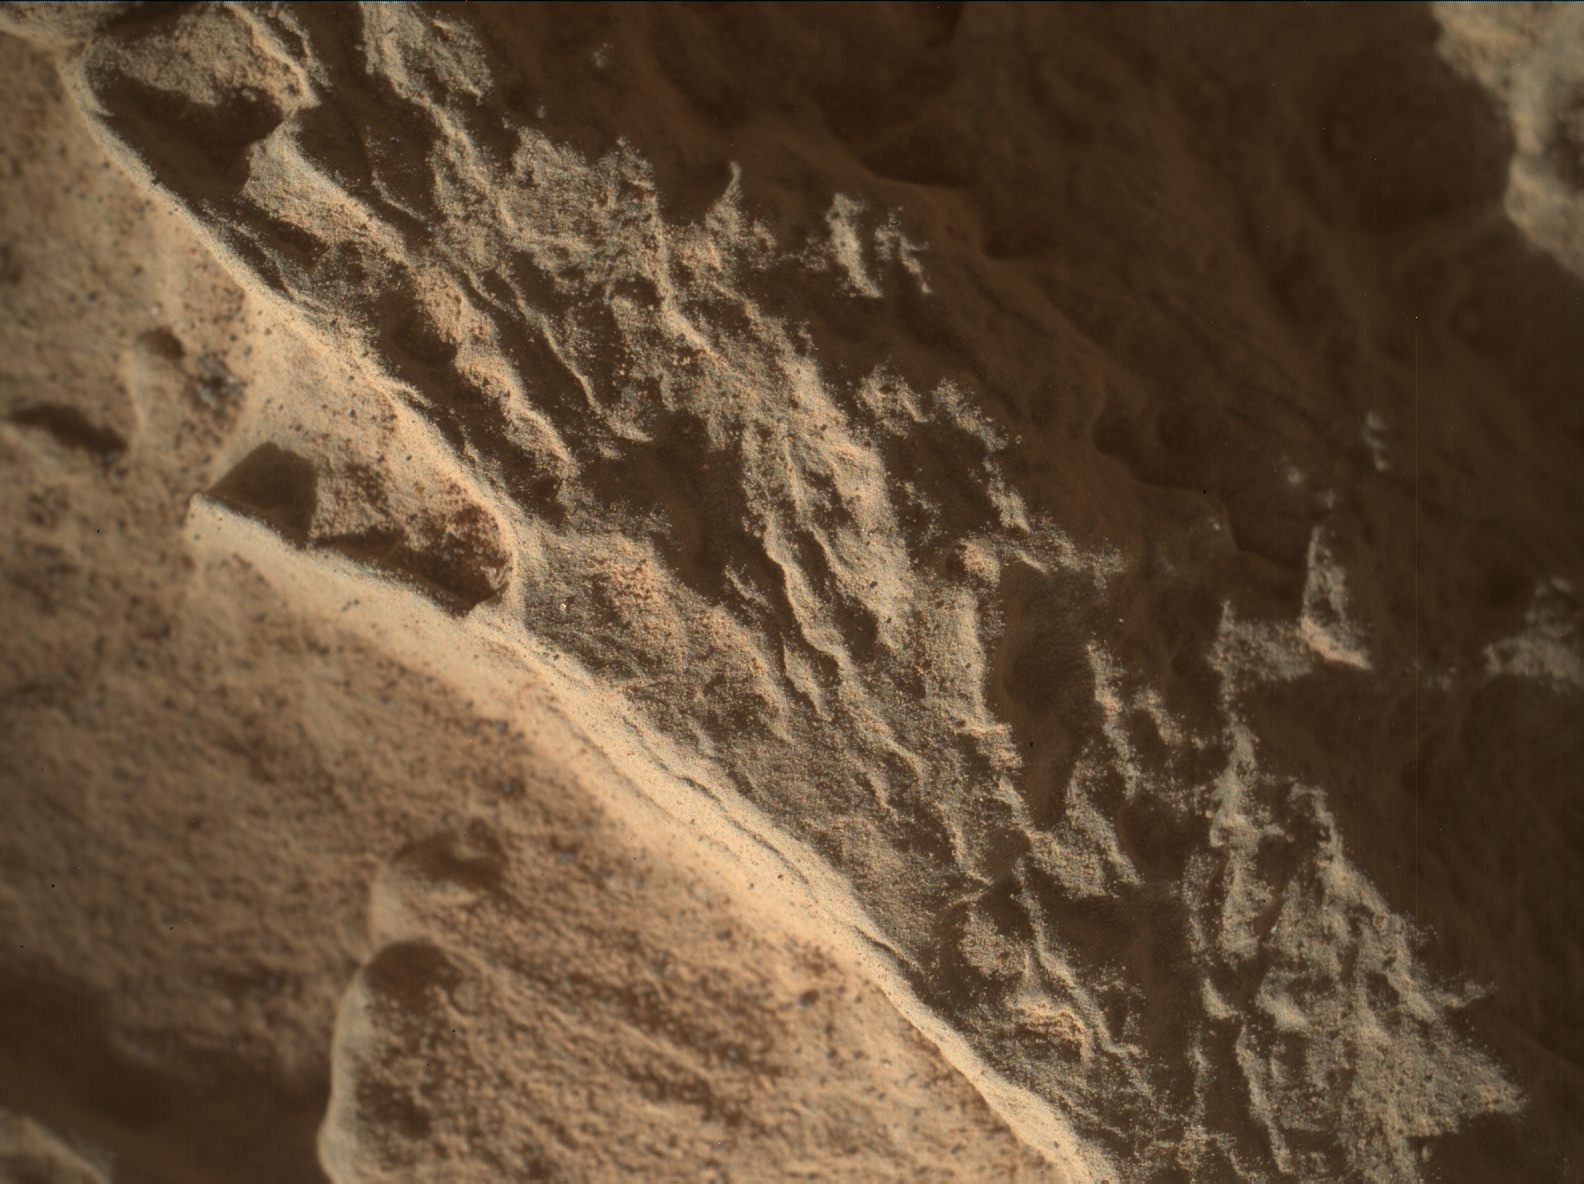 Nasa's Mars rover Curiosity acquired this image using its Mars Hand Lens Imager (MAHLI) on Sol 3907